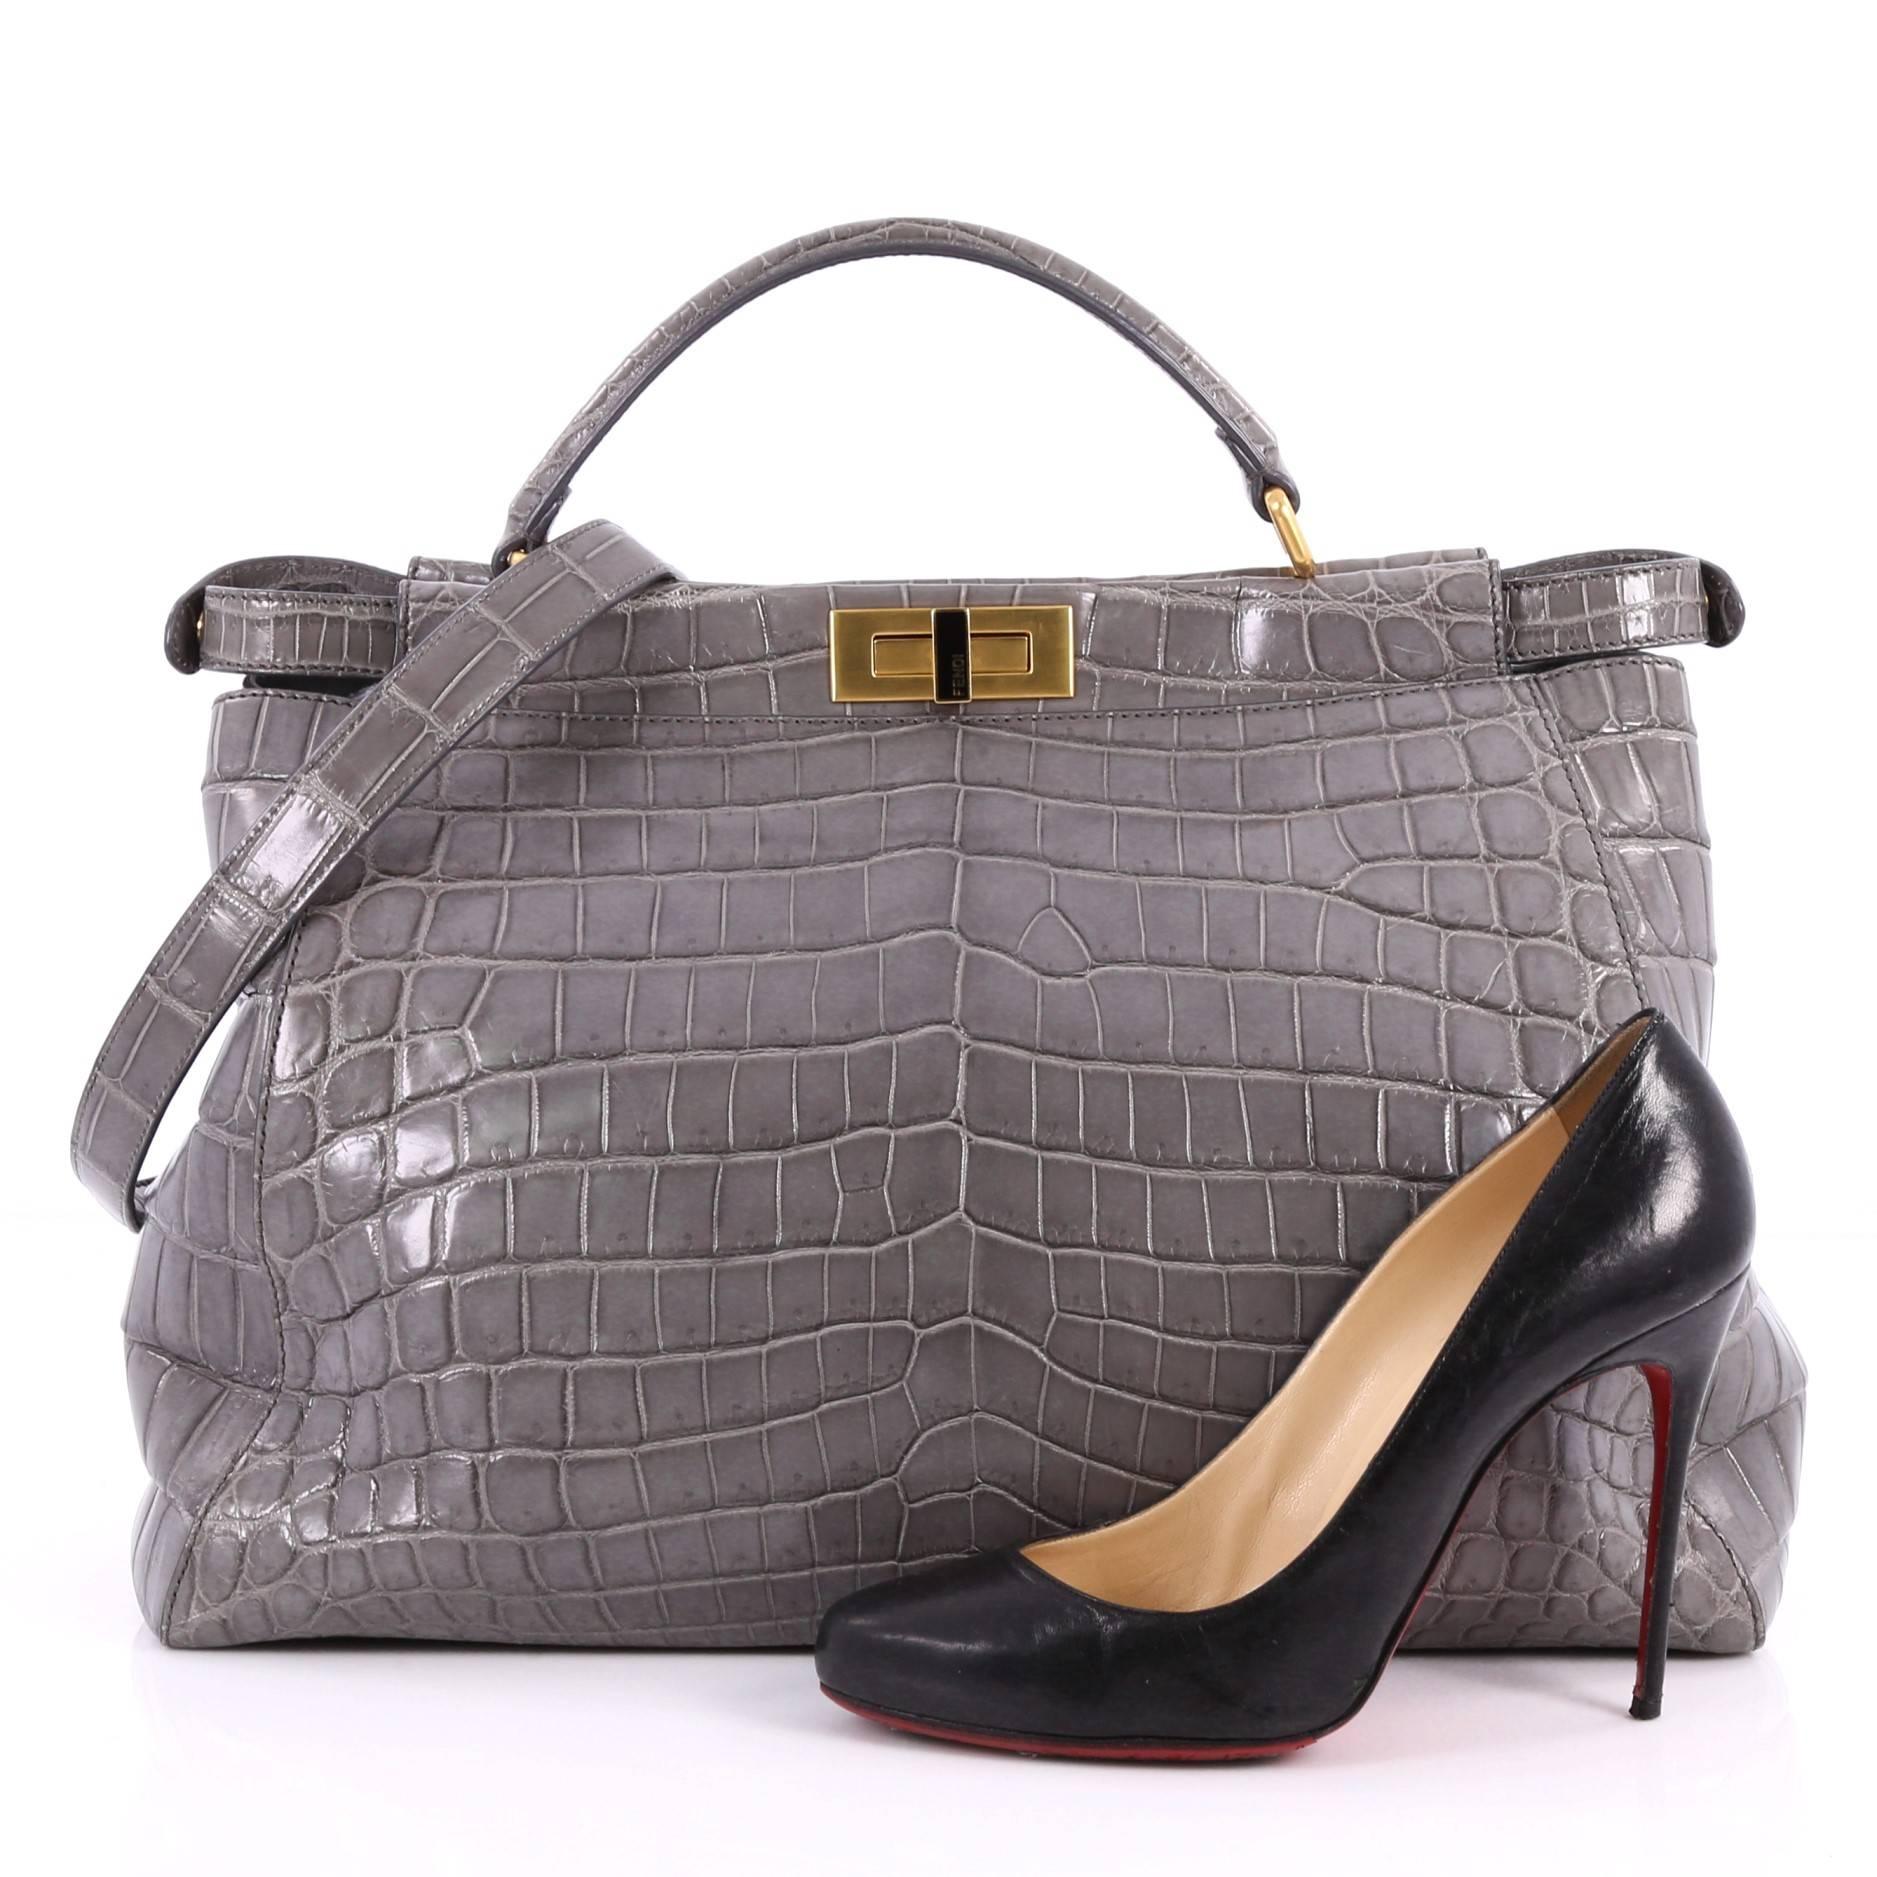 This authentic Fendi Peekaboo Handbag Crocodile Large is one of Fendi's best-known designs exuding a luxurious yet minimalist appearance. Crafted in genuine grey crocodile skin, this versatile and stylish satchel features a flat leather top handle,